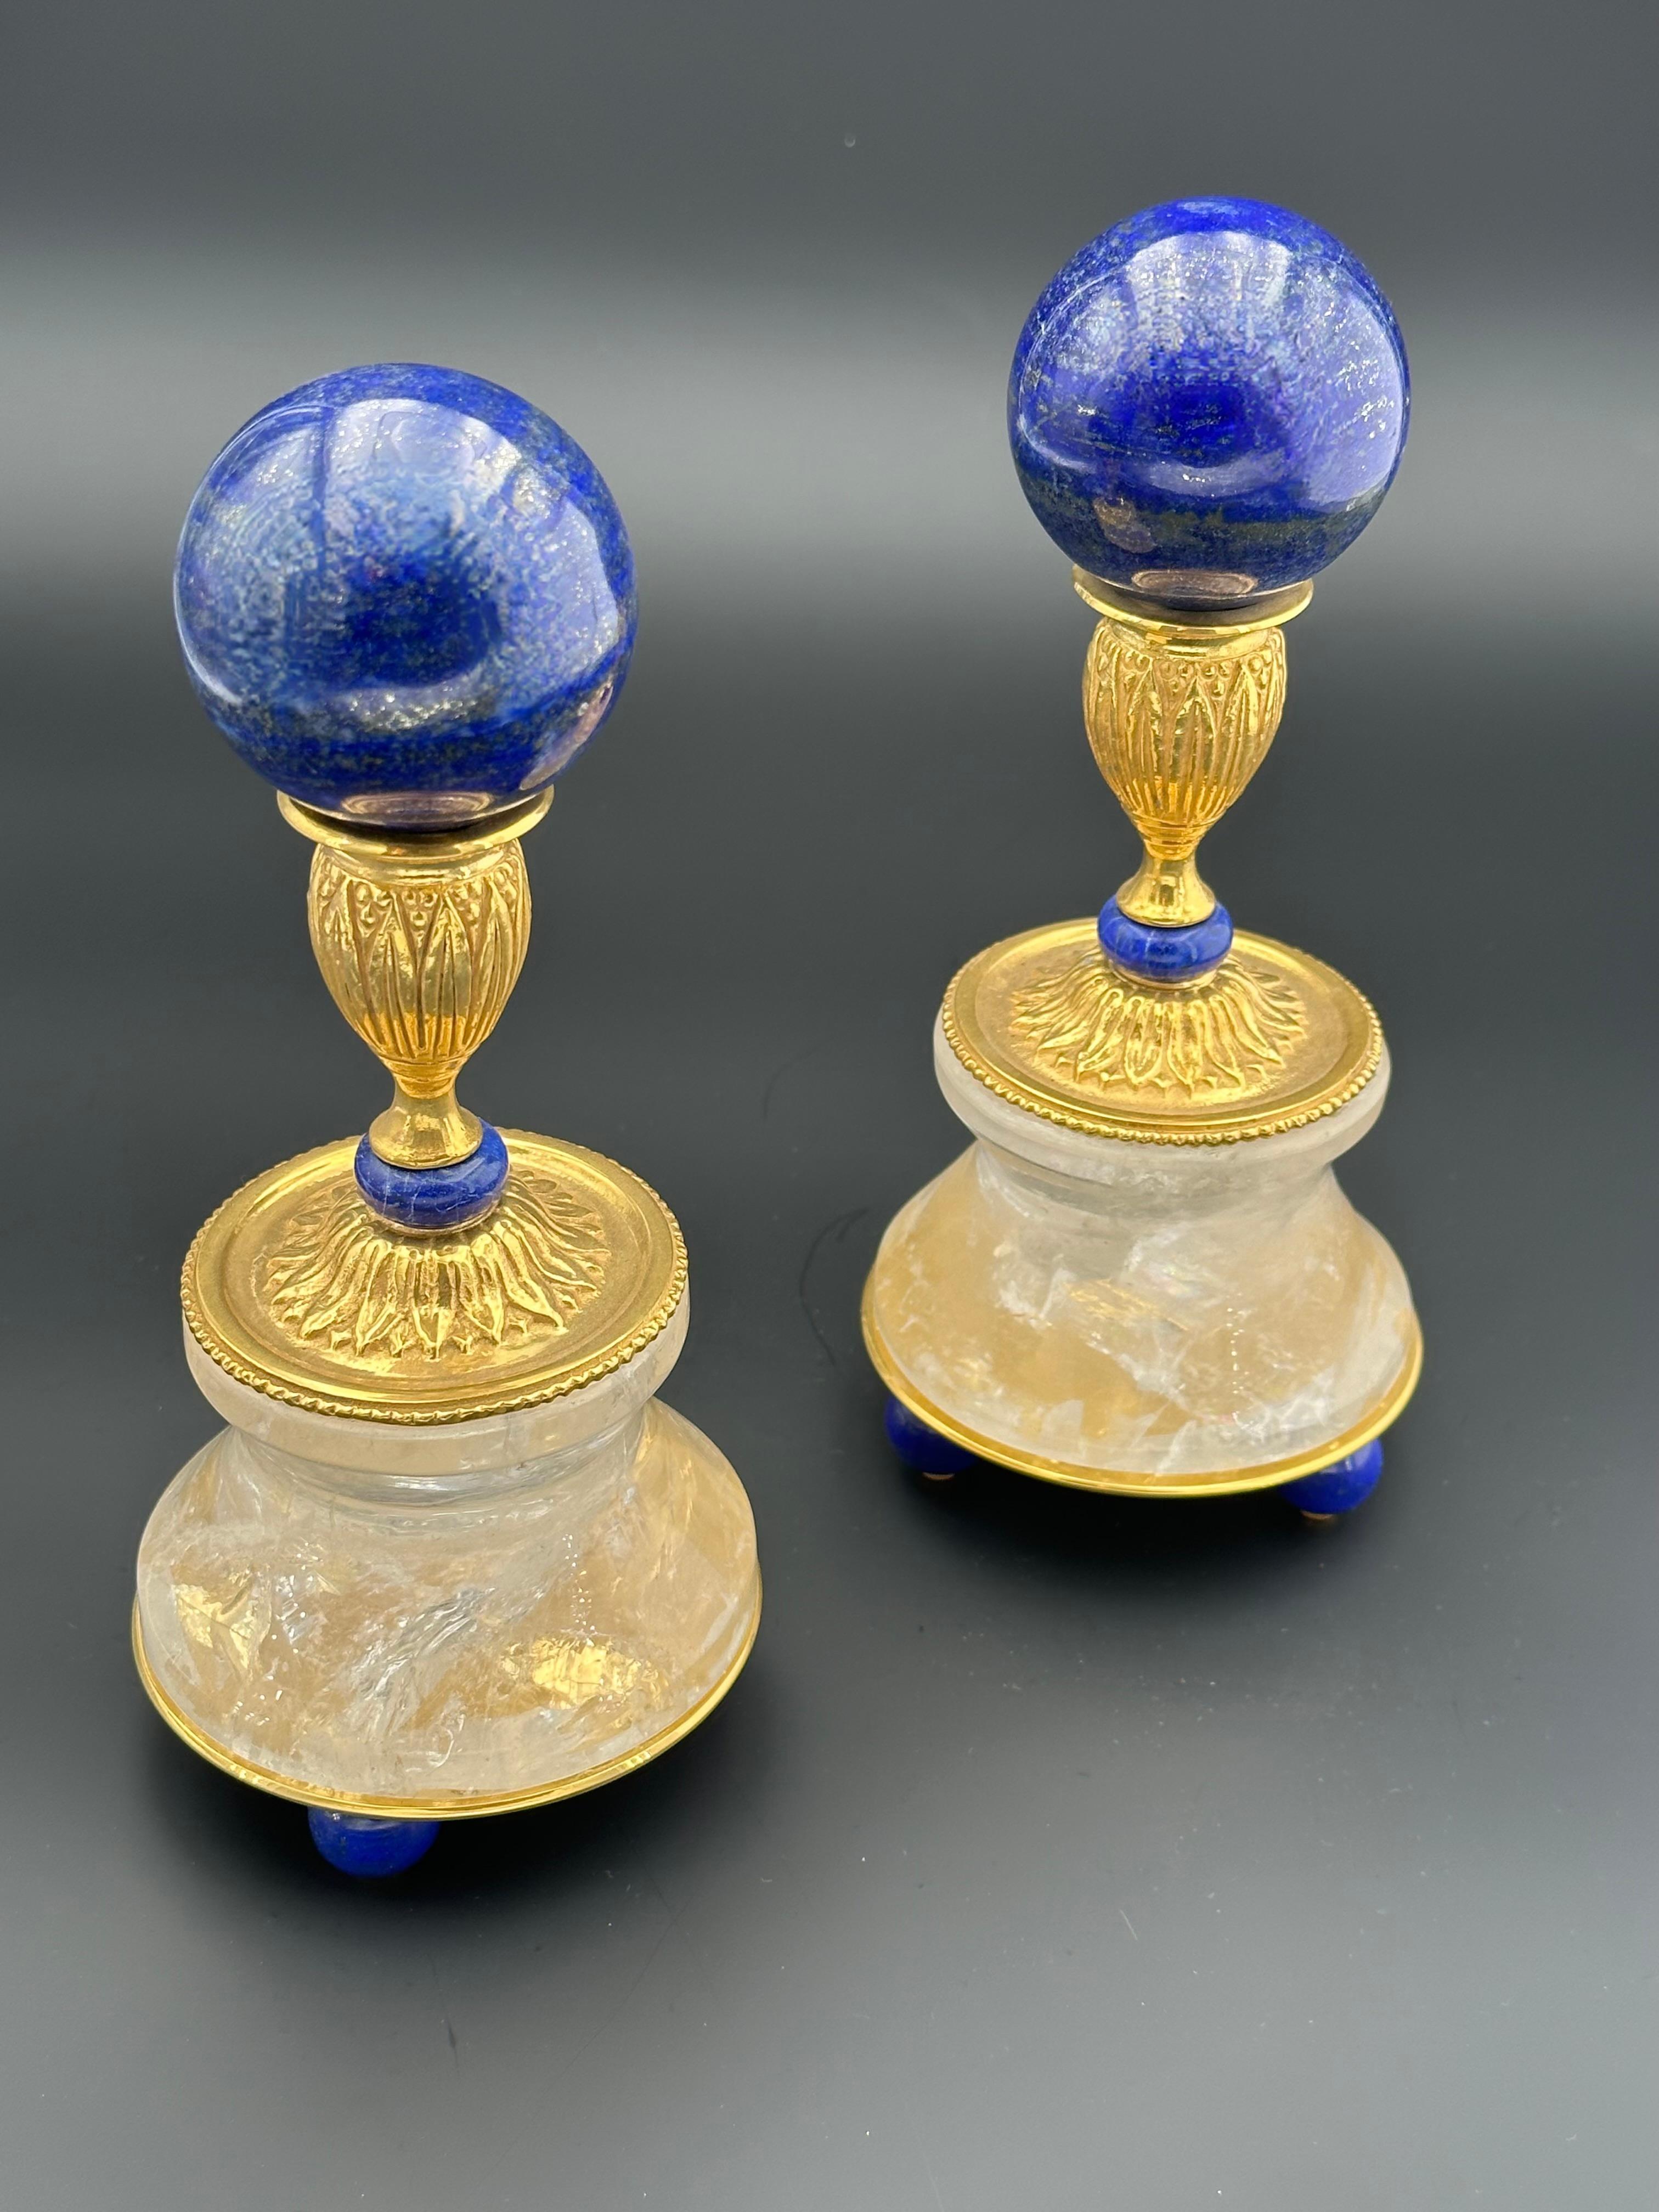 Amazing pair of lapis lazuli spheres with their rock crystal supports.
Made in FRANCE 